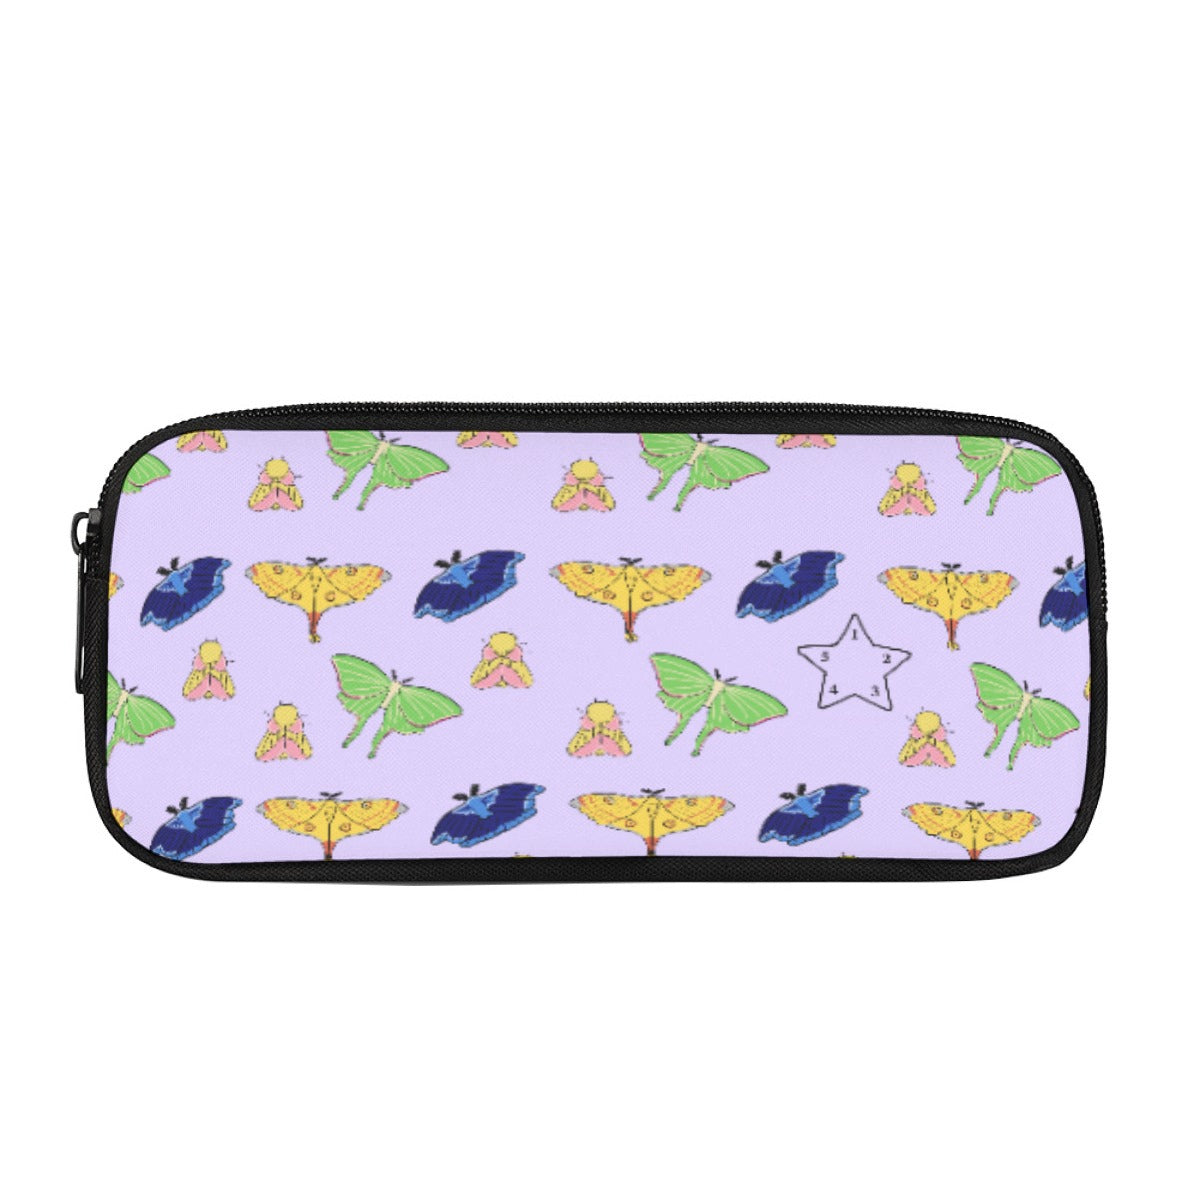 Moth Pencil Bag with Star